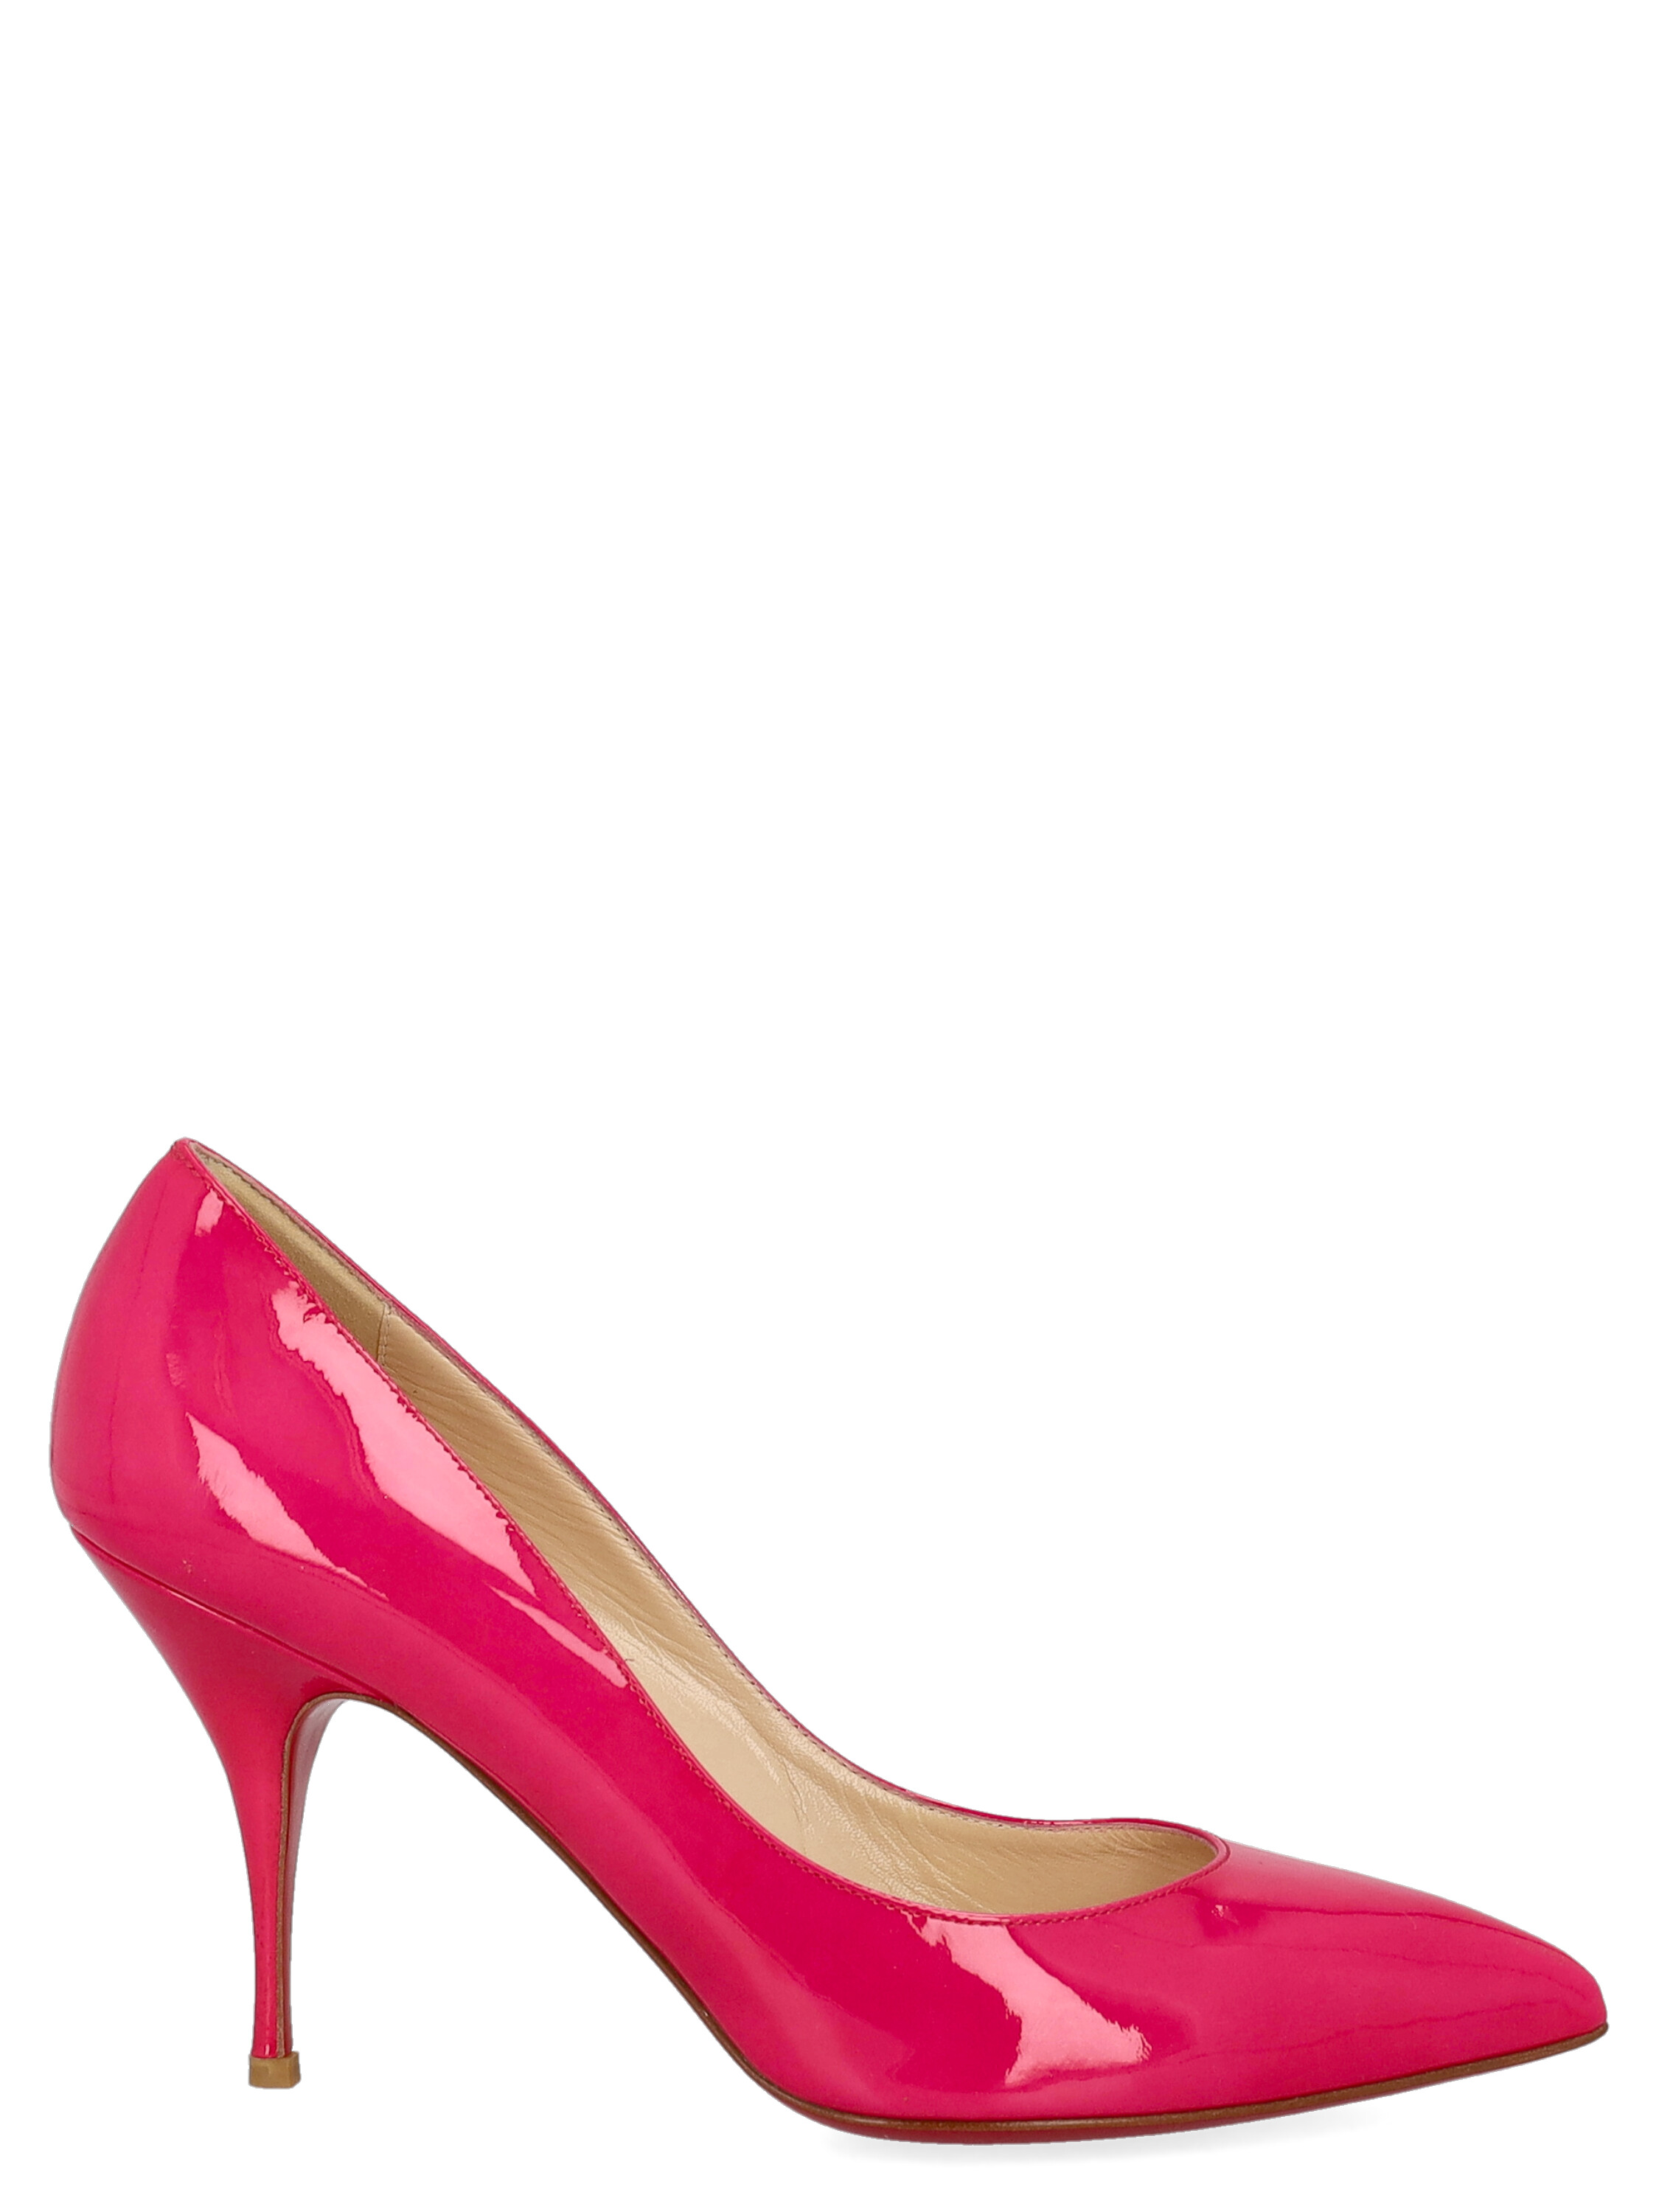 Pre-owned Christian Louboutin Women's Pumps -  - In Pink It 38.5